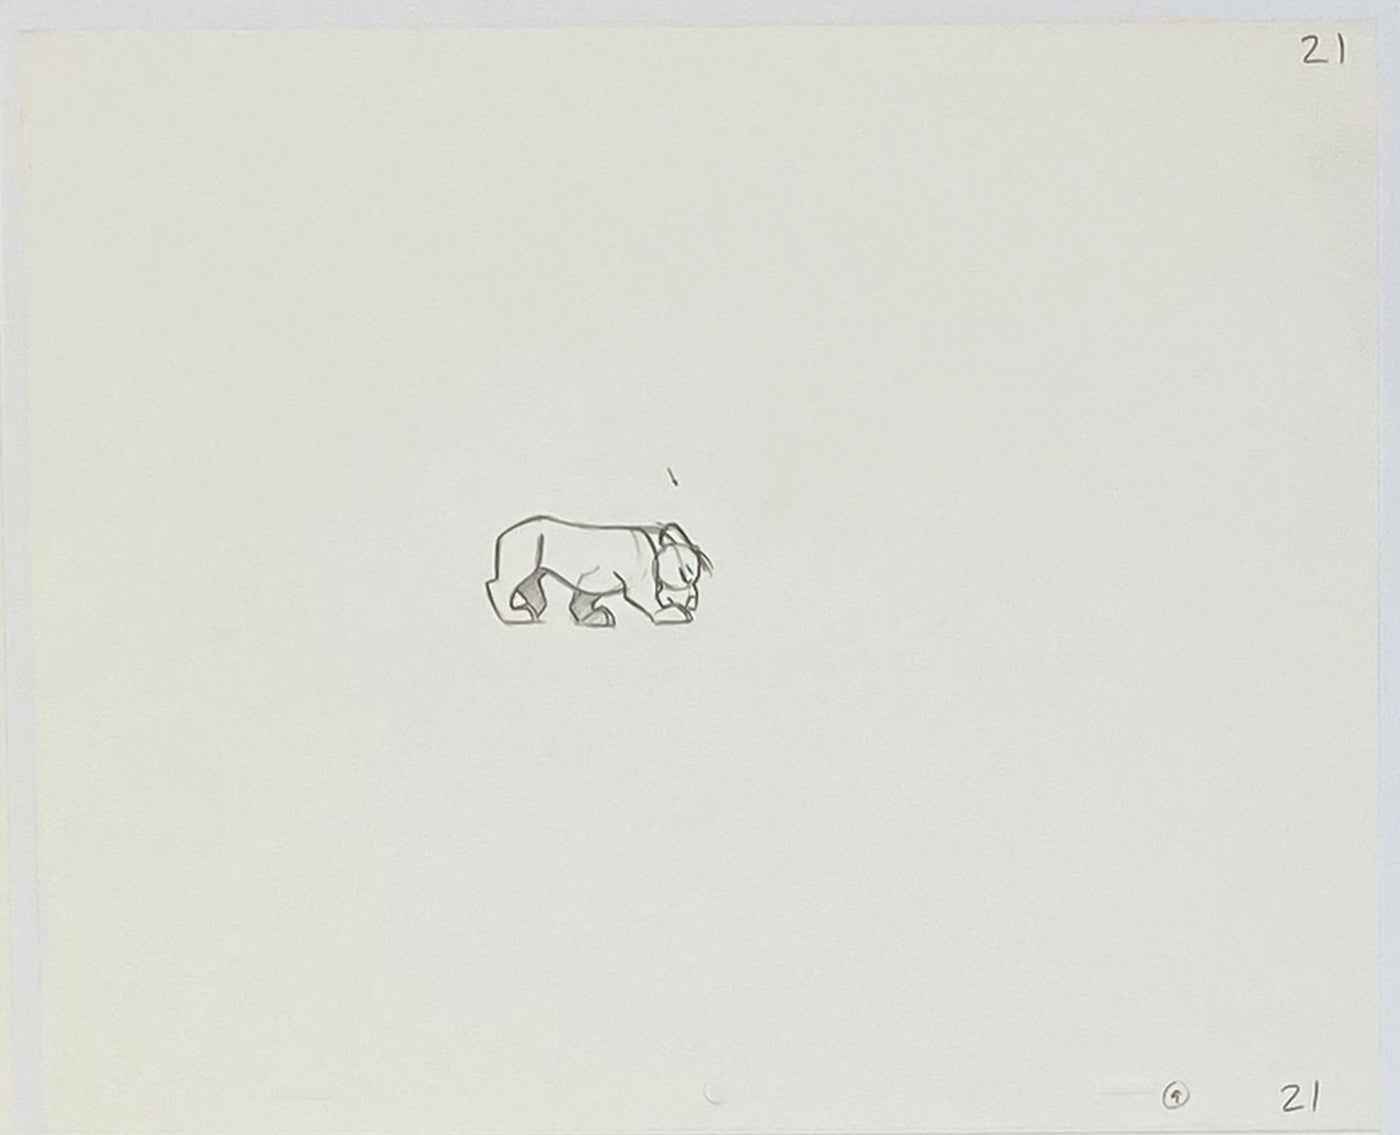 Original Walt Disney Sequence of 5 Production Drawings from The Lion King featuring Simba